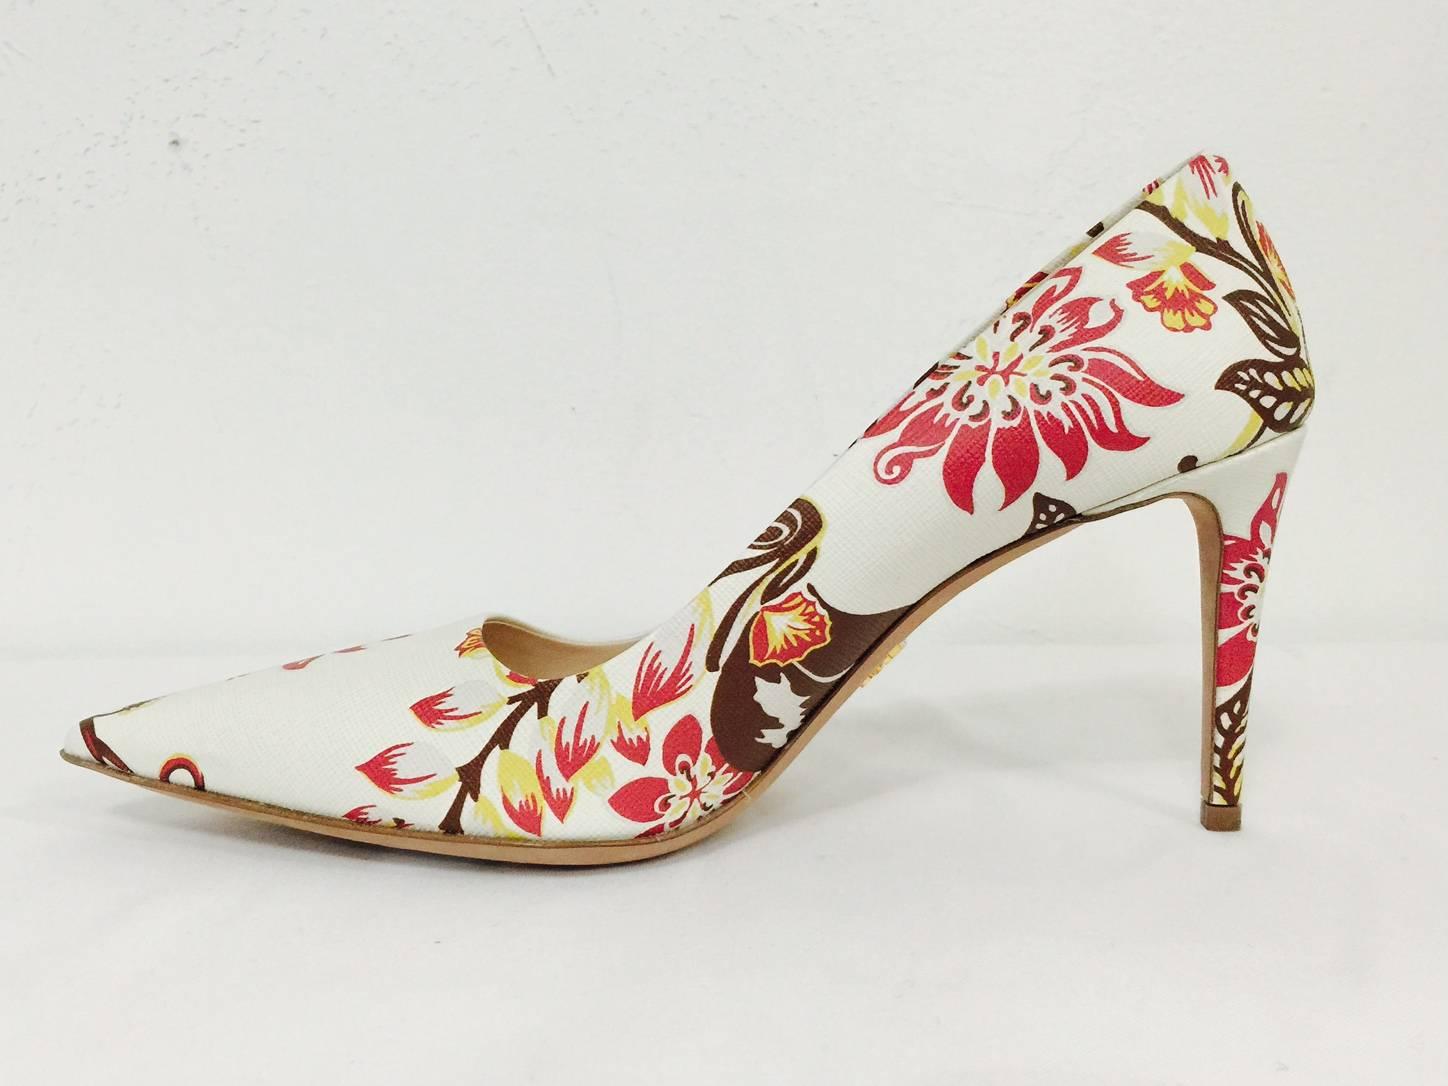 Beige New Prada Floral Print Saffiano Leather Pointed Toe High Heel Pumps 